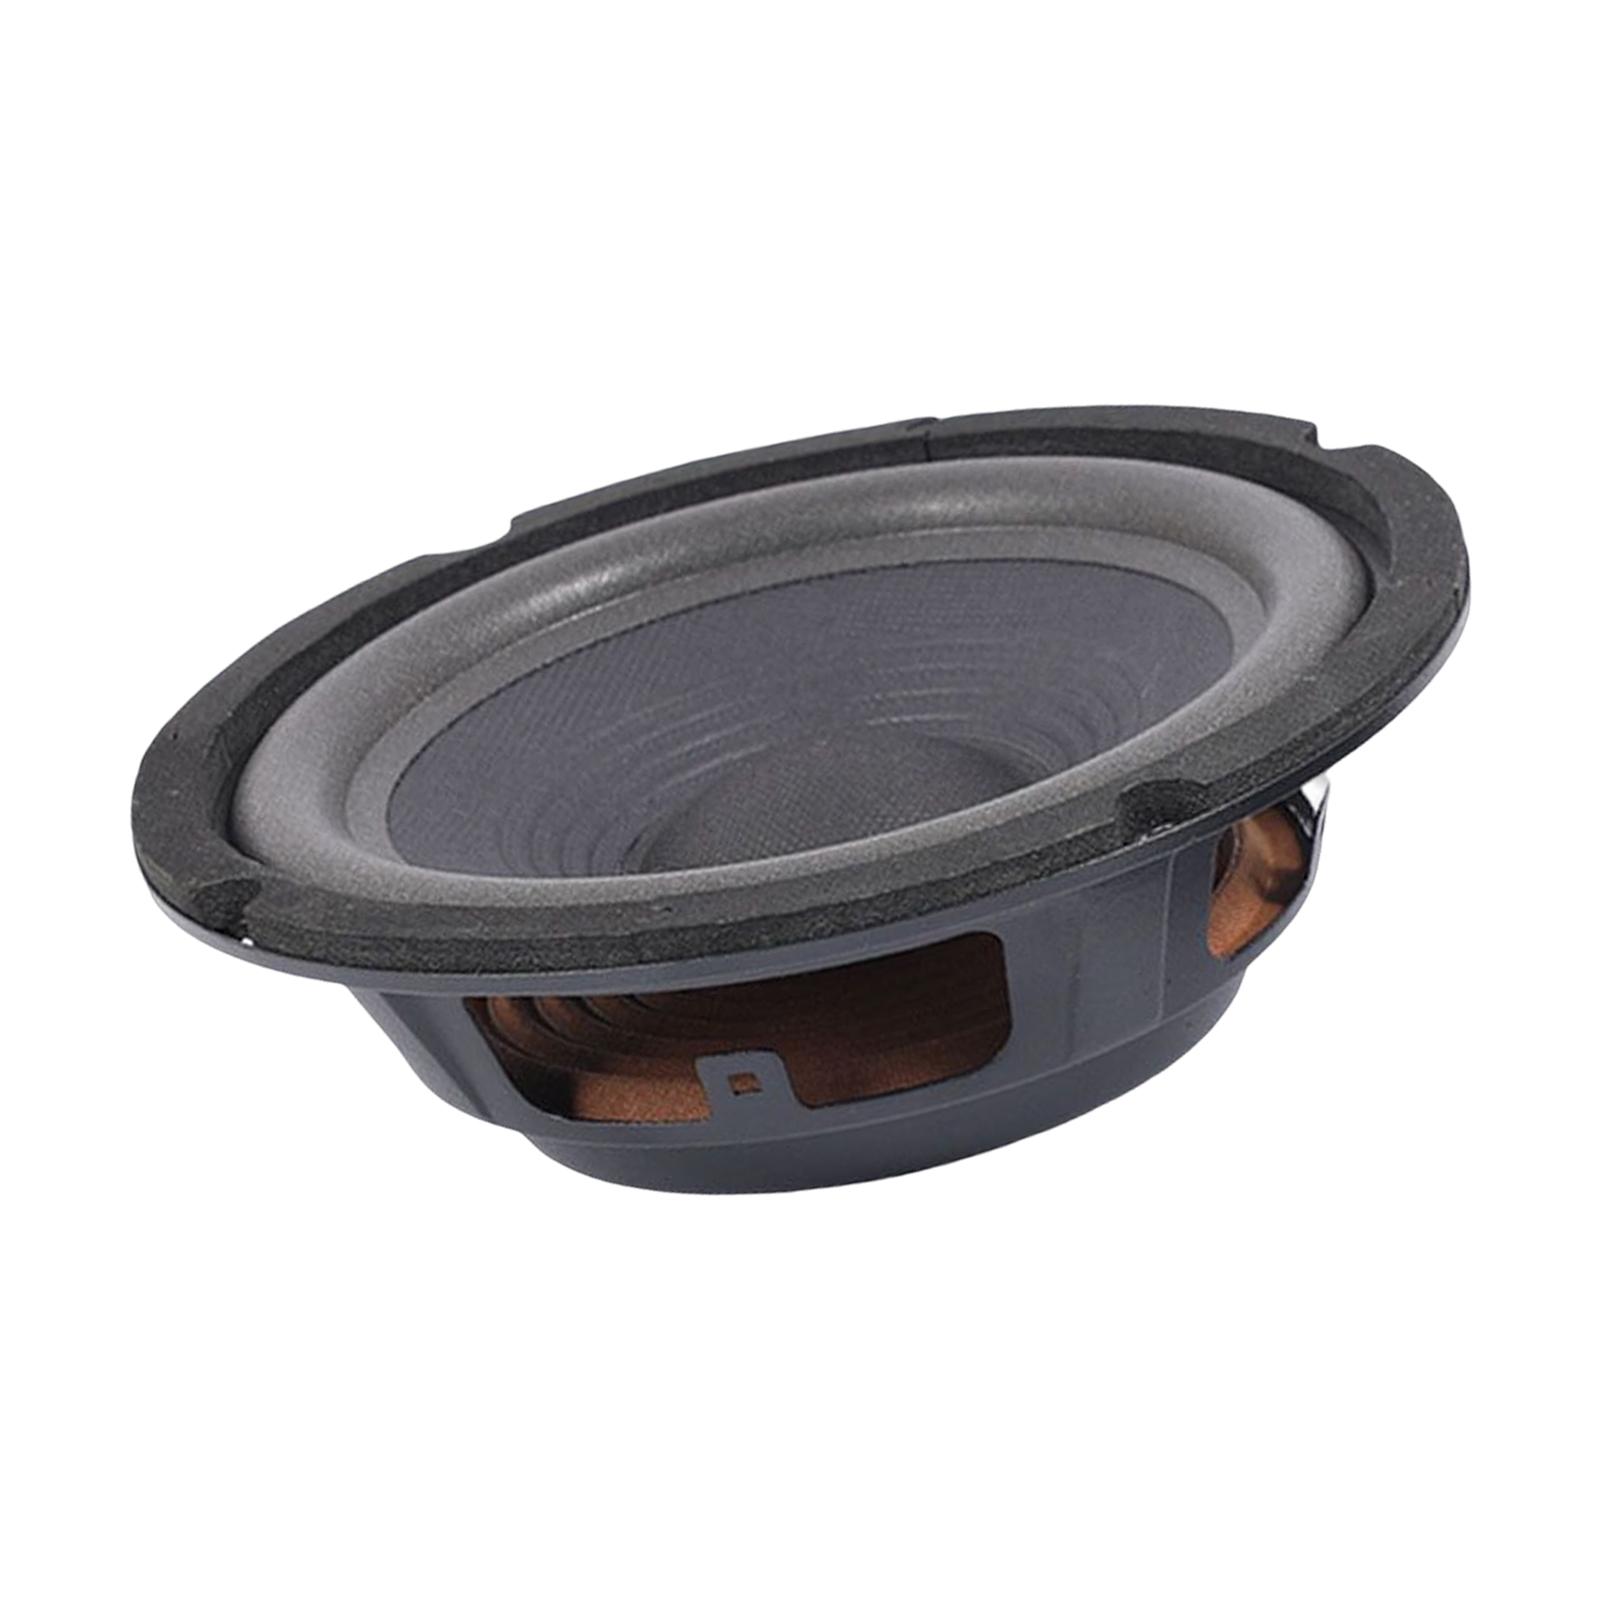 Bass Speaker Passive , Audio Stereo Subwoofer Woofer Vibration Membrane 10inches